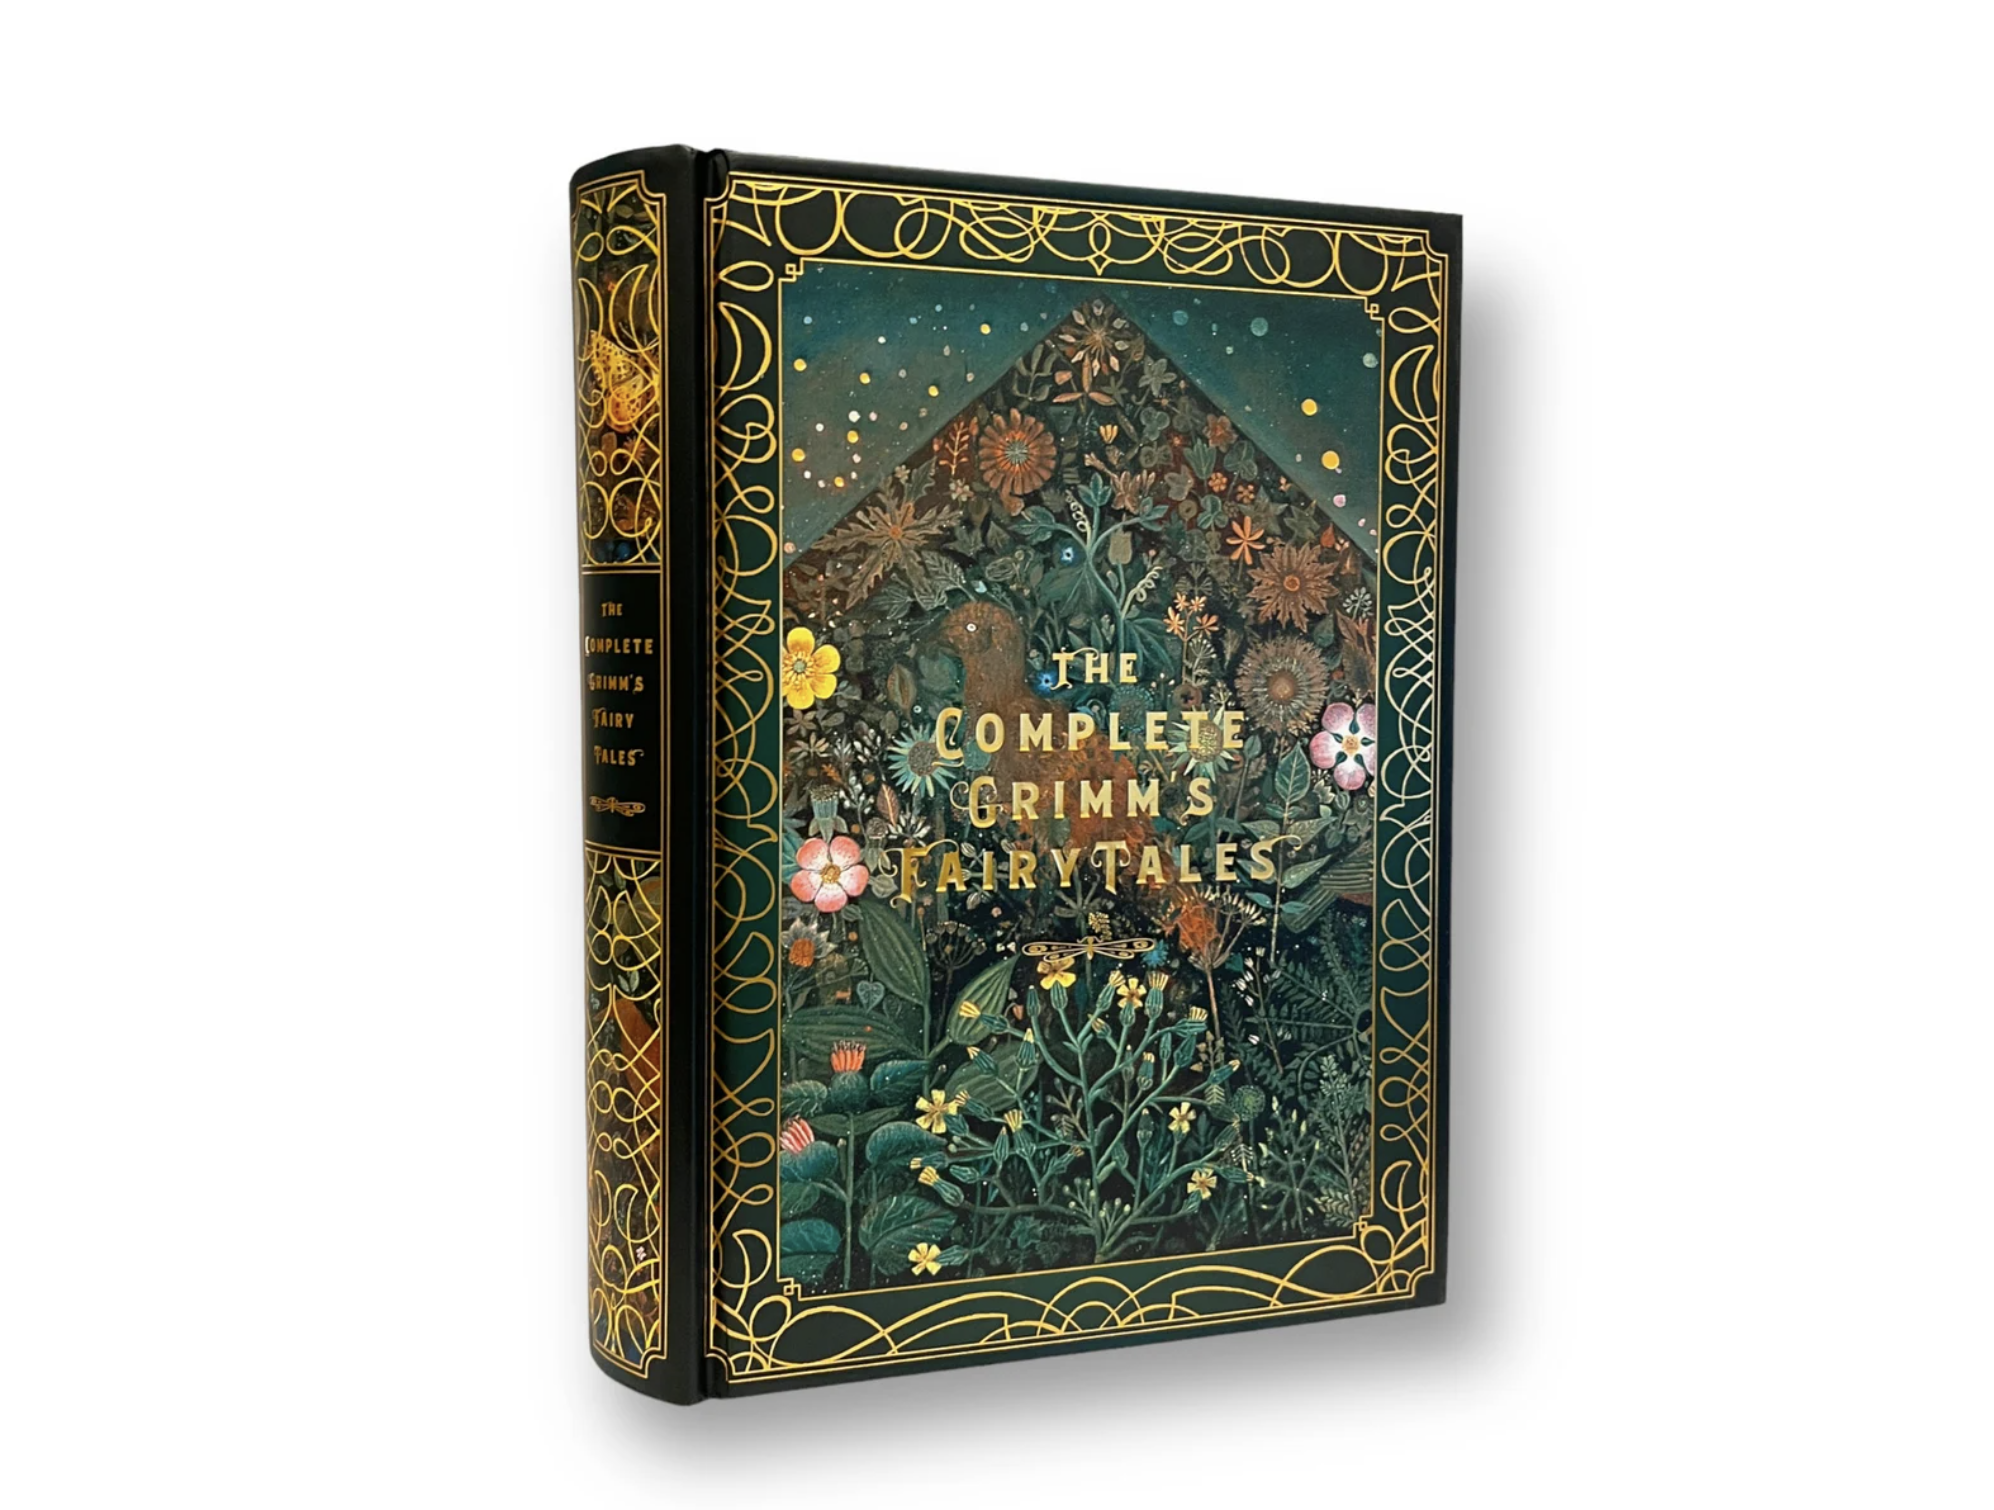 Beautiful edition of the Complete Grimm Fairytales